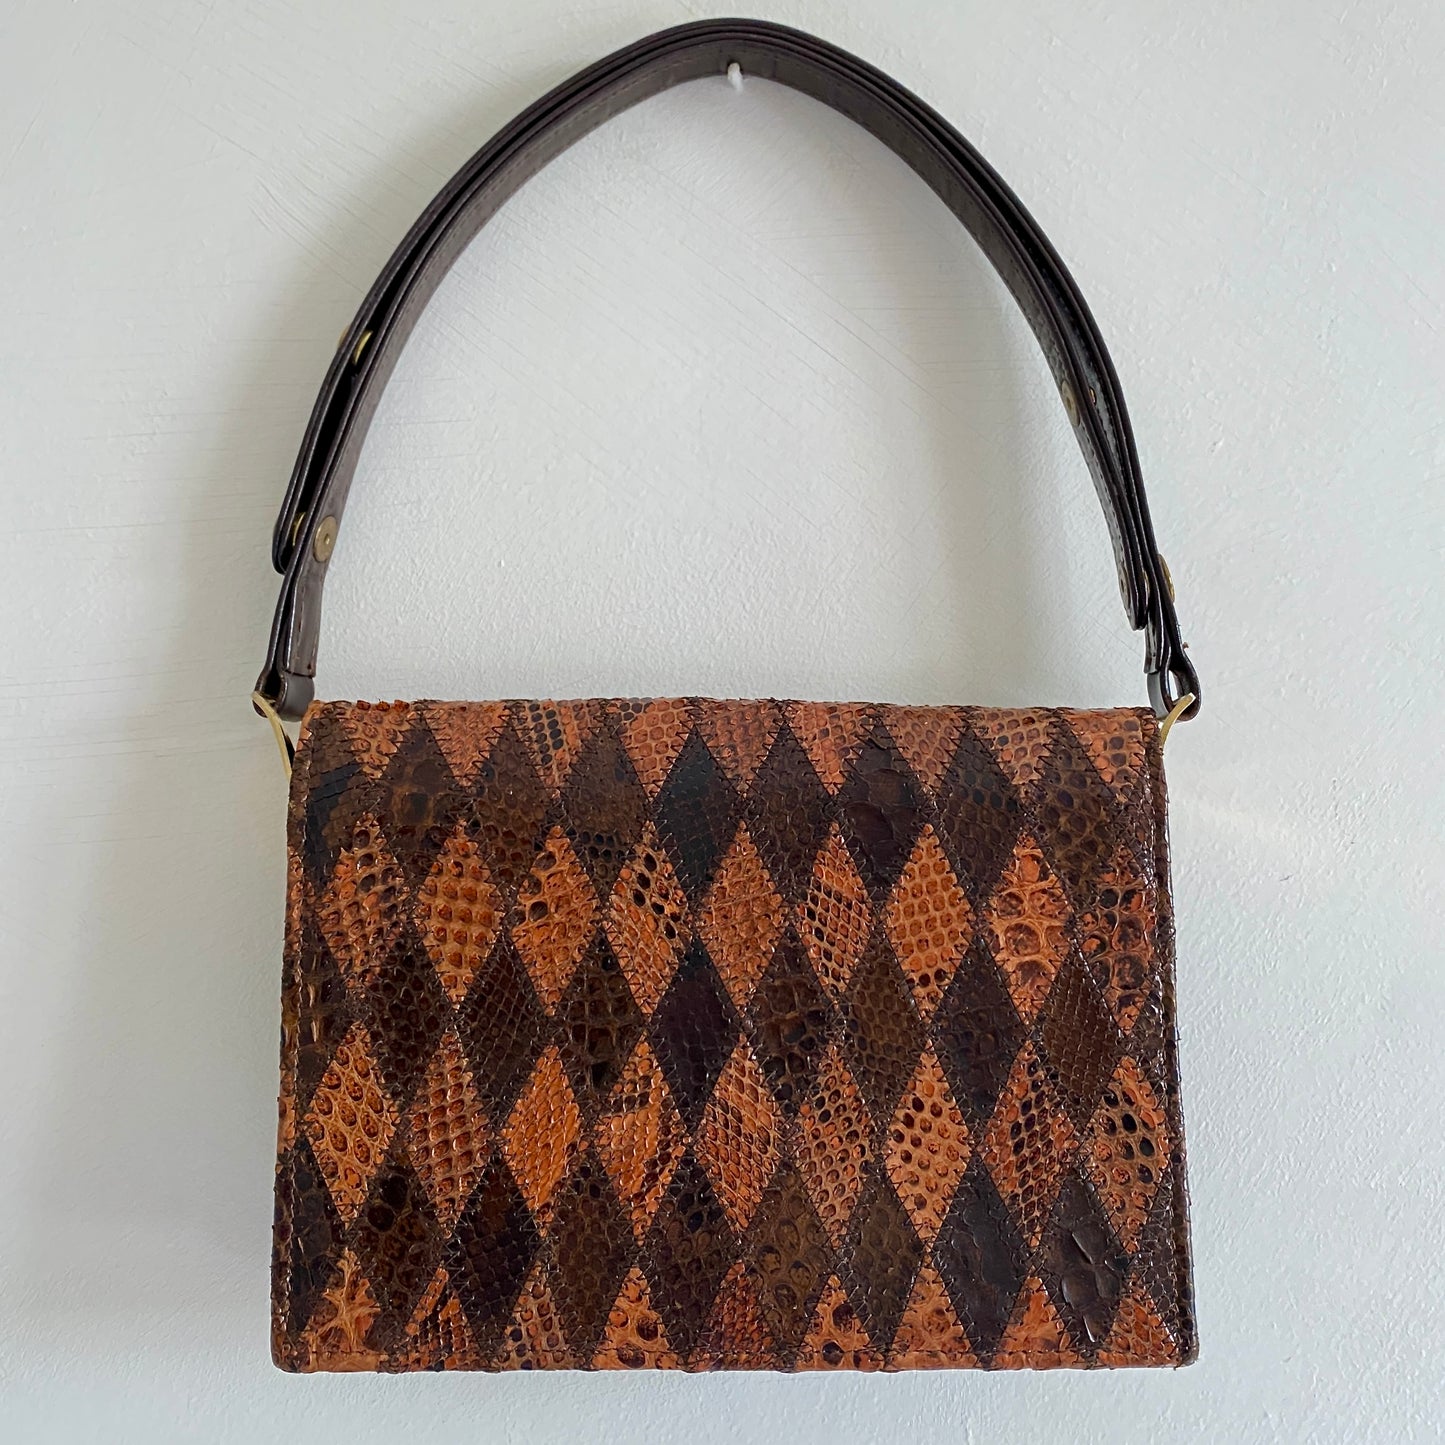 Brown leather geometric patchwork vintage bag Flap closure with press stud fastening Adjustable strap (measures from 19" to 30") Gold tone hardware Patchwork pattern to front and back Fabric lined Two inner compartments and one small zipped inner pocket